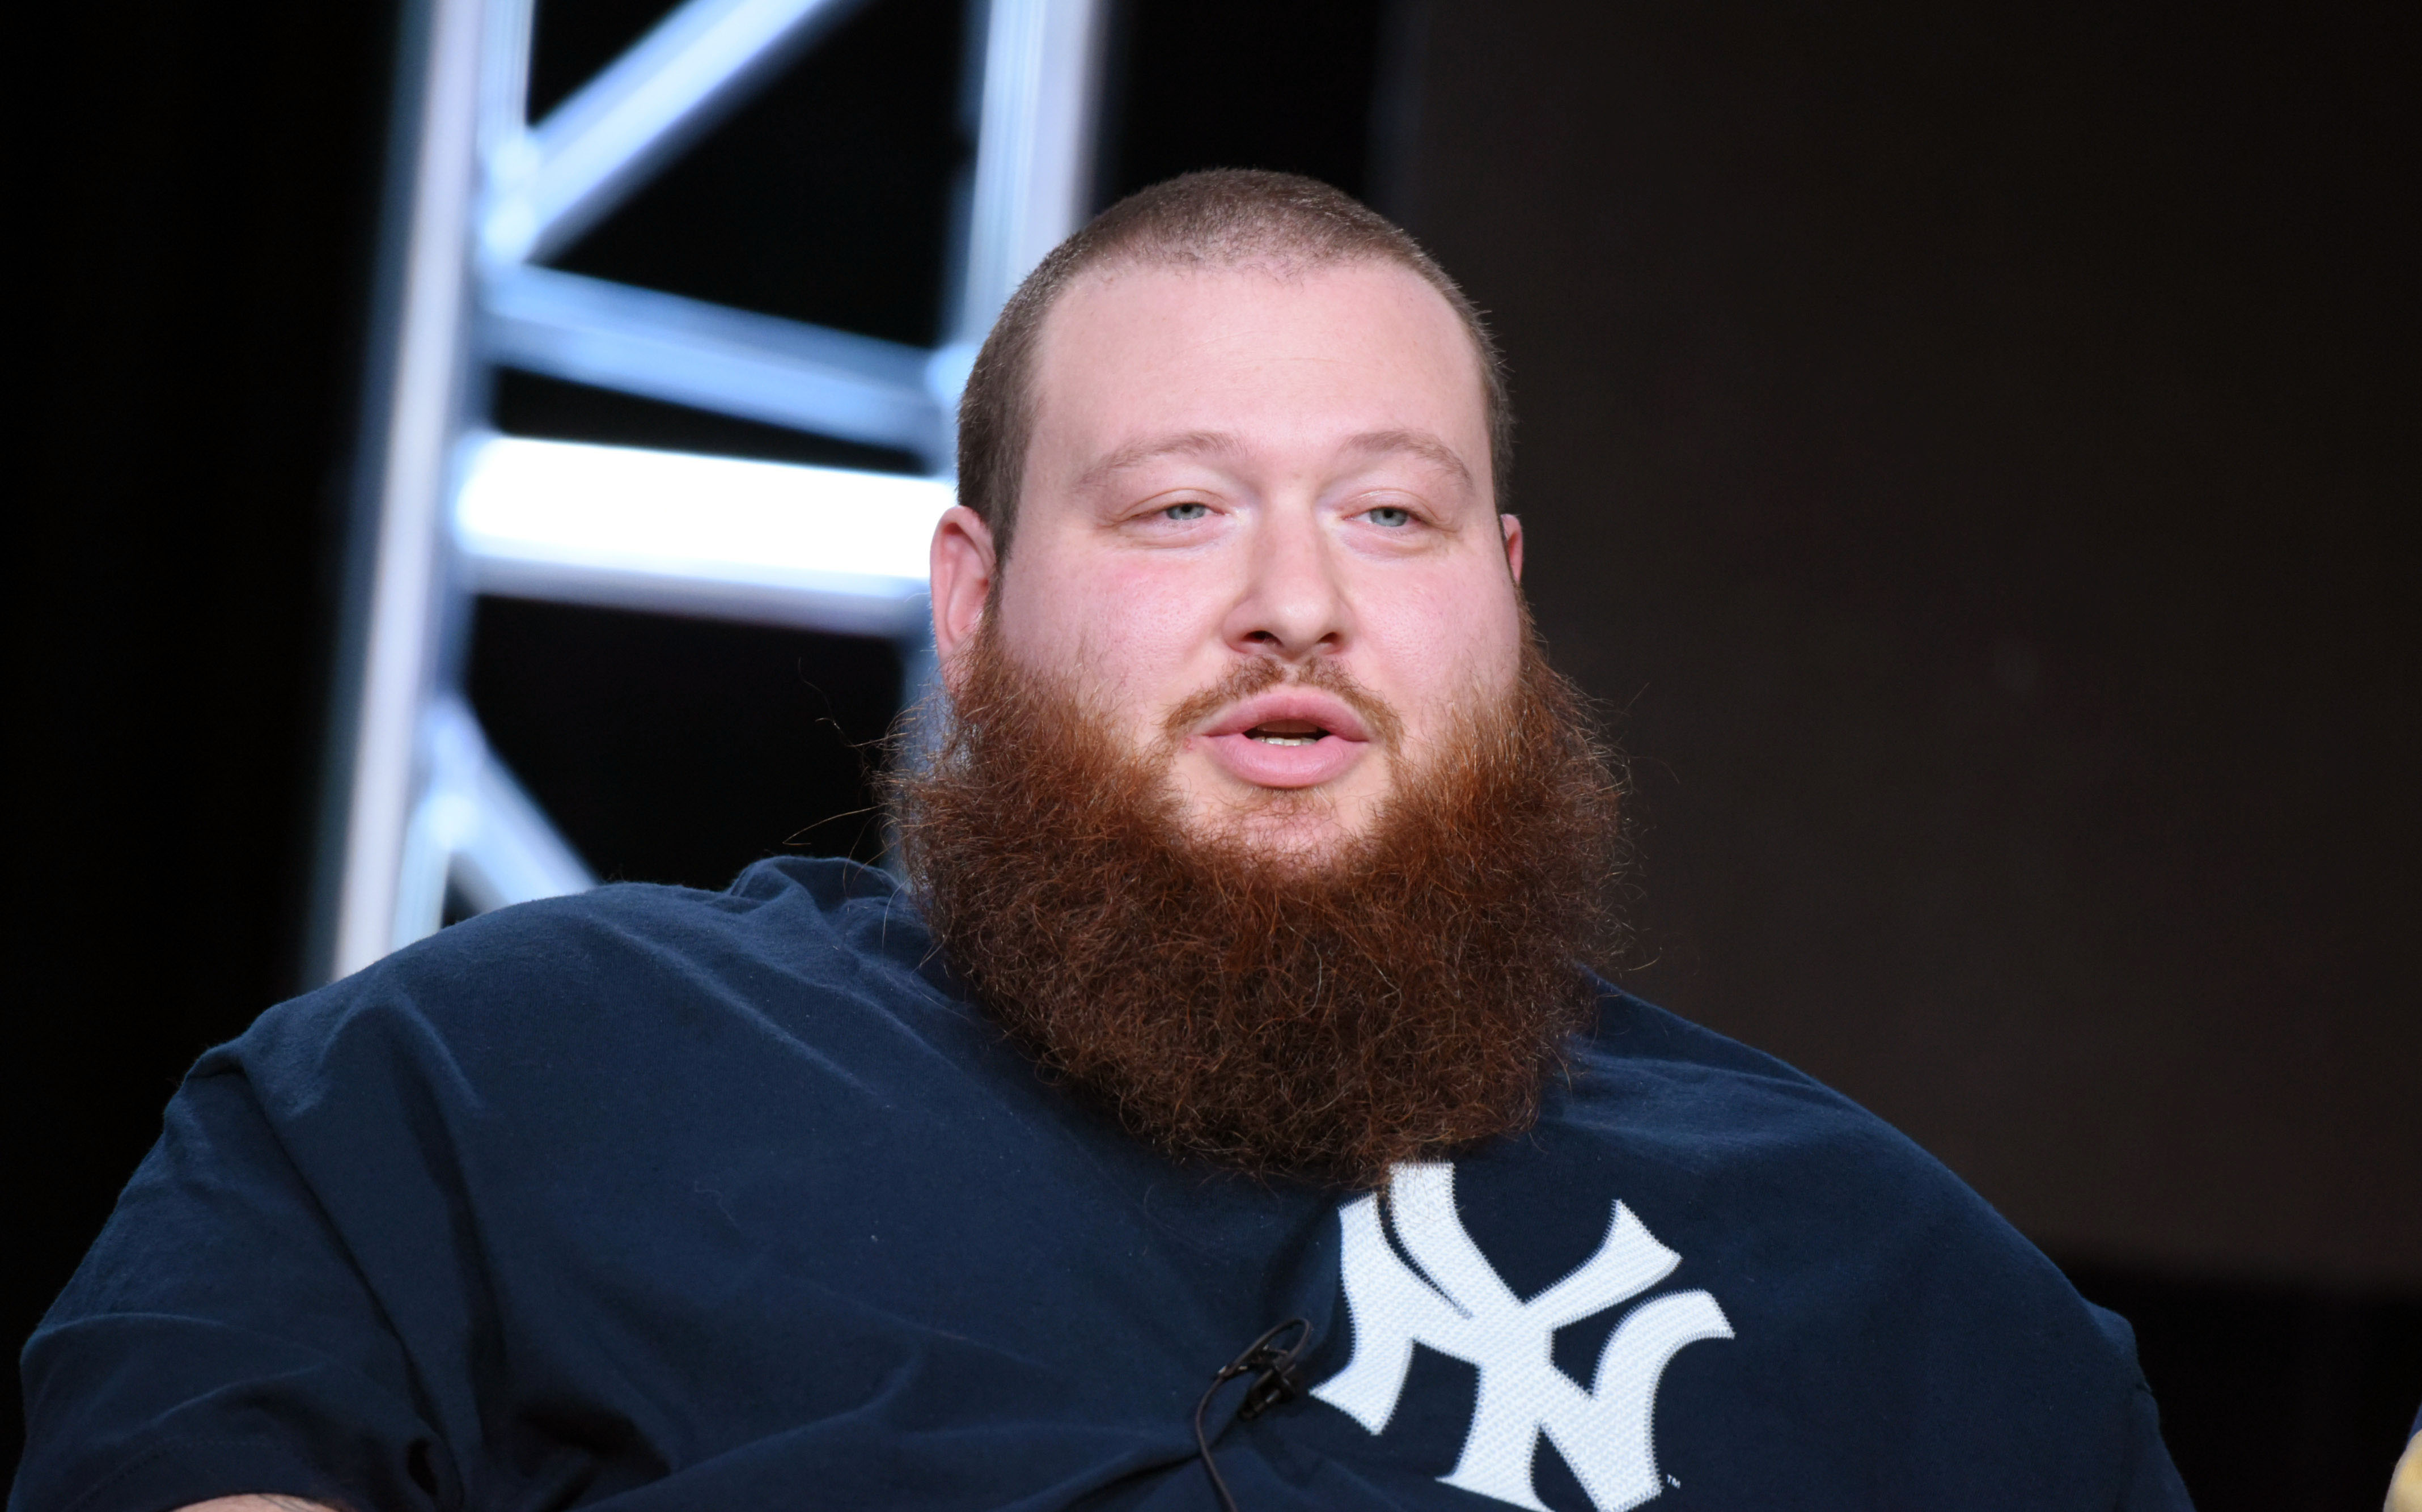 Action Bronson and Earl Sweatshirt 2022 tour: Where to buy tickets